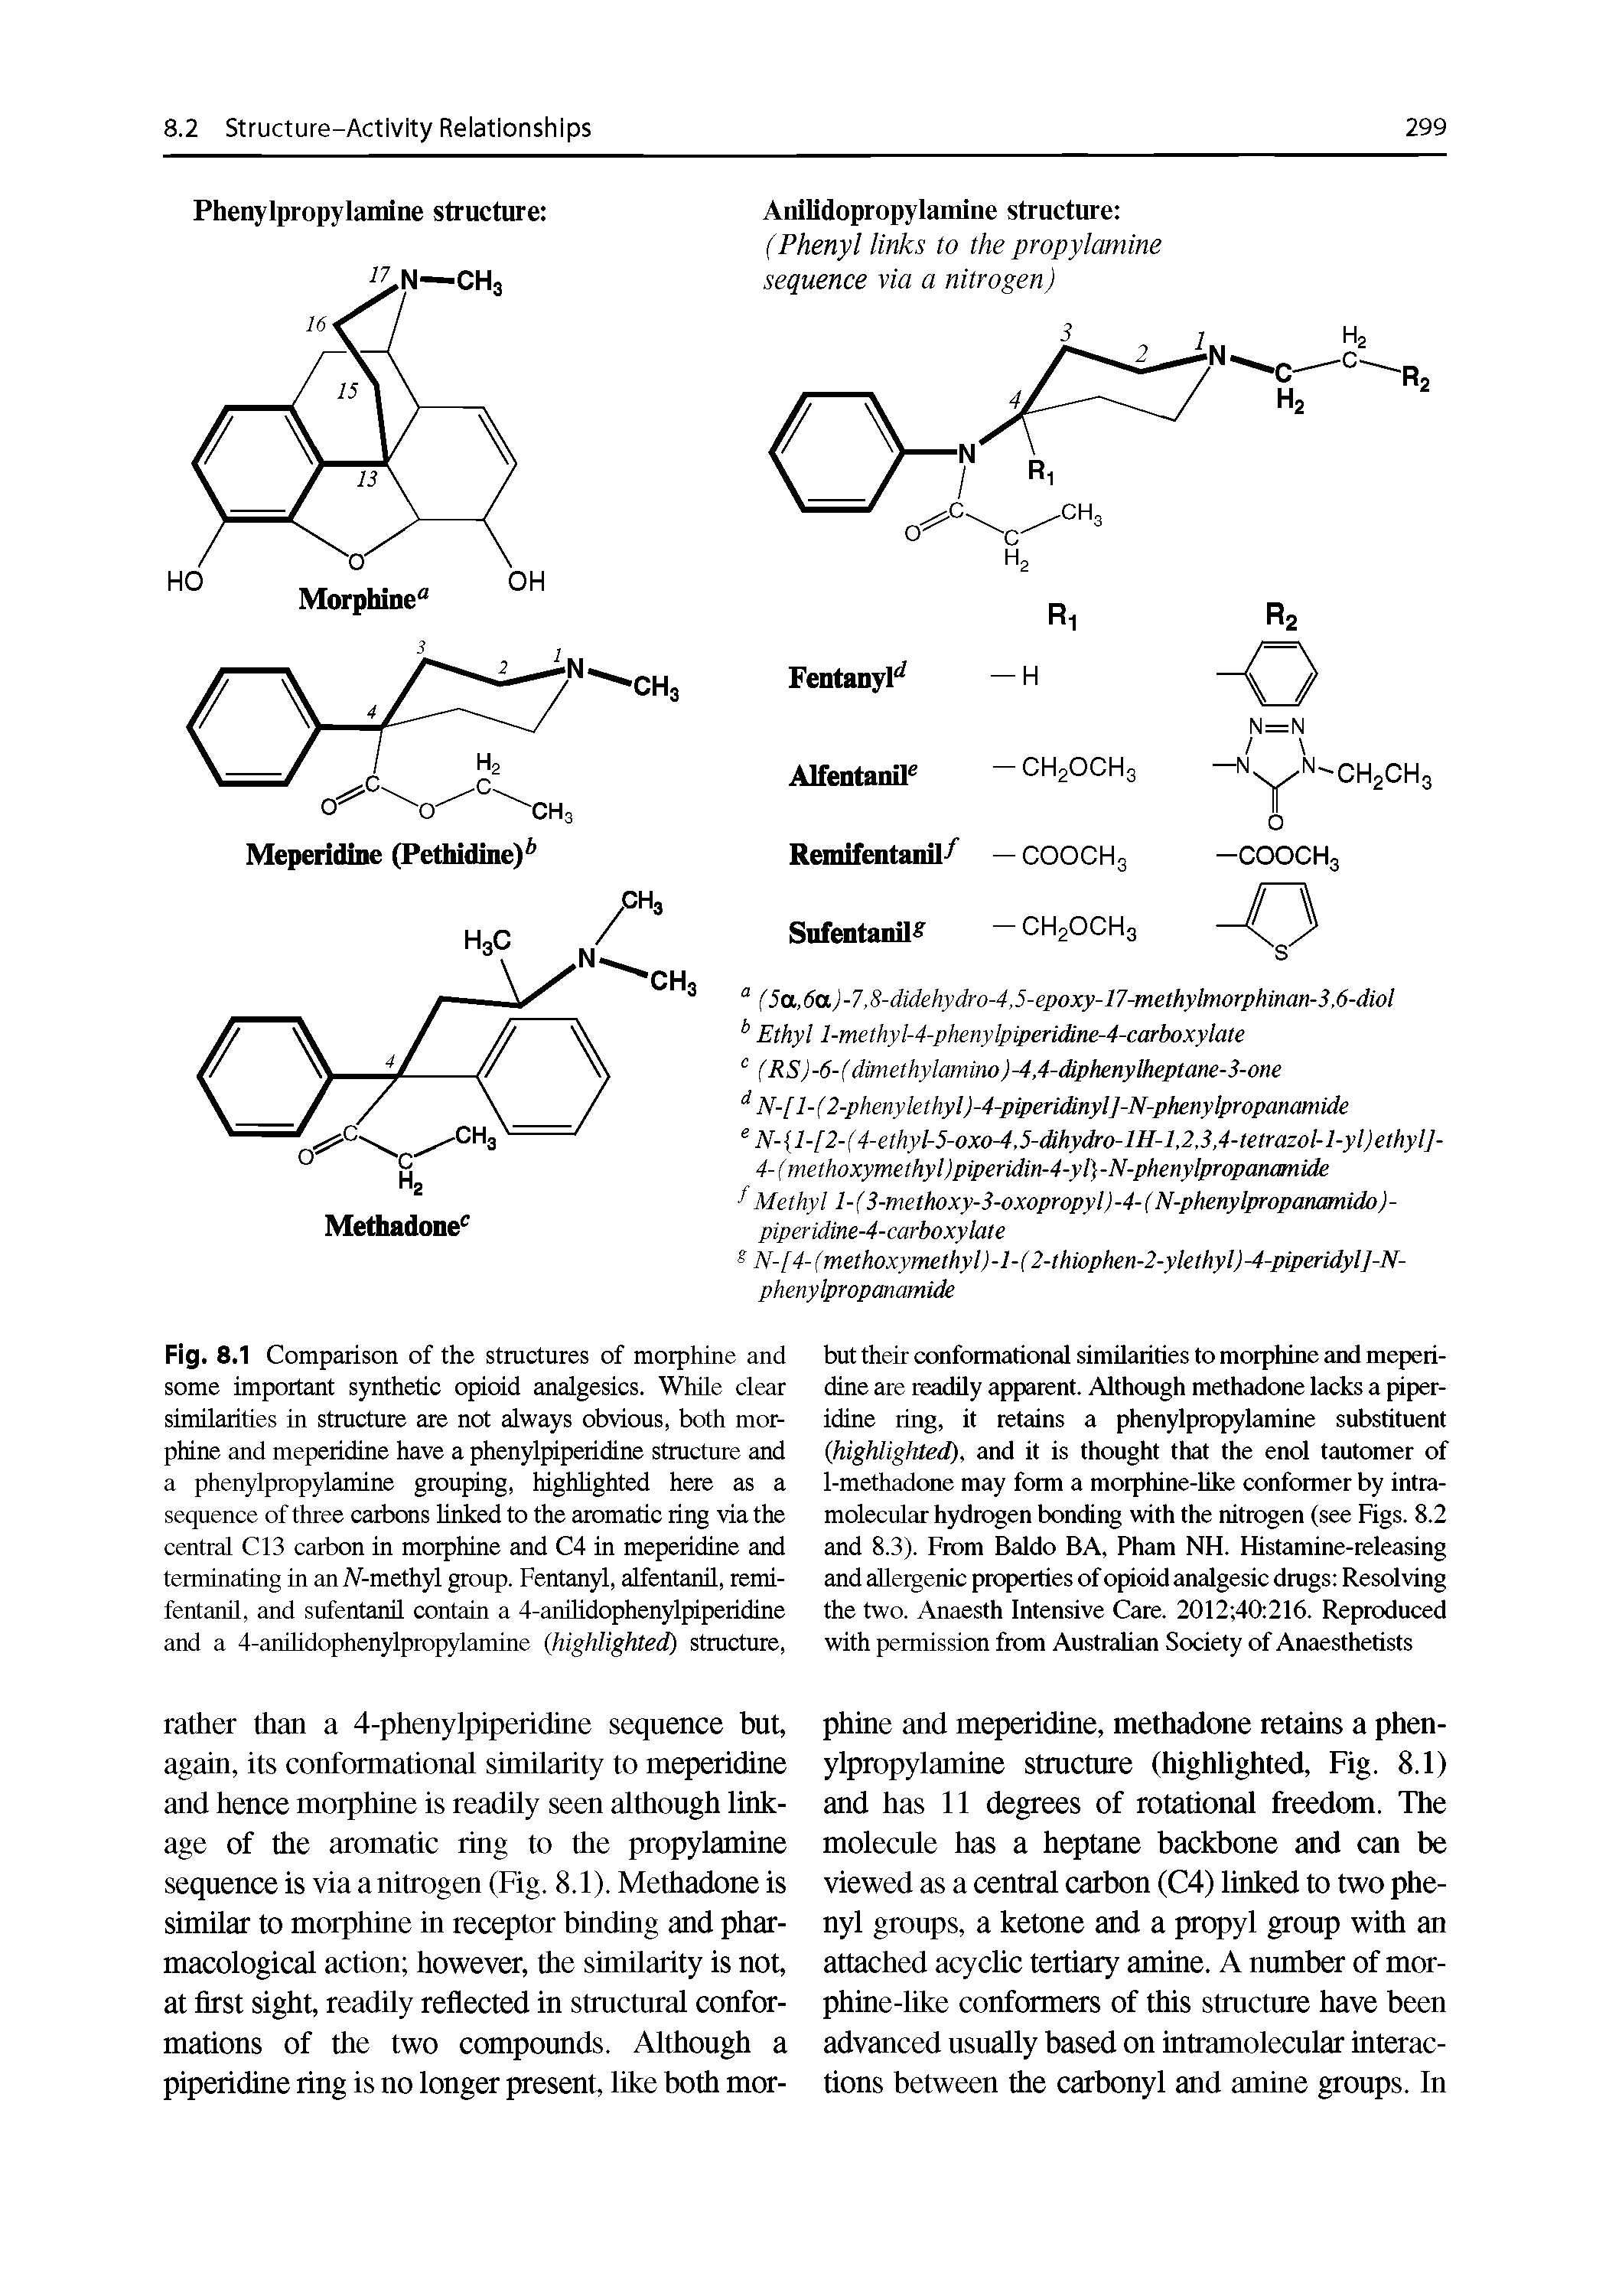 Fig. 8.1 Comparison of the structures of morphine and some important synthetic opioid analgesics. While clear similarities in stmctnre are not always obvious, both morphine and meperidine have a phenylpipeiidine structure and a phenylpropylamine grouping, highlighted here as a sequence of three carbons hiiked to the aromatic ring via the central C13 carbon in morphine and C4 in meperidine and terminating in an Ai-methyl gronp. Fentanyl, alfentaml, remi-fentanil, and sufentanil contain a 4-anihdophenylpiperidine and a 4-anihdophenylpropylamine (highlighted) structure.